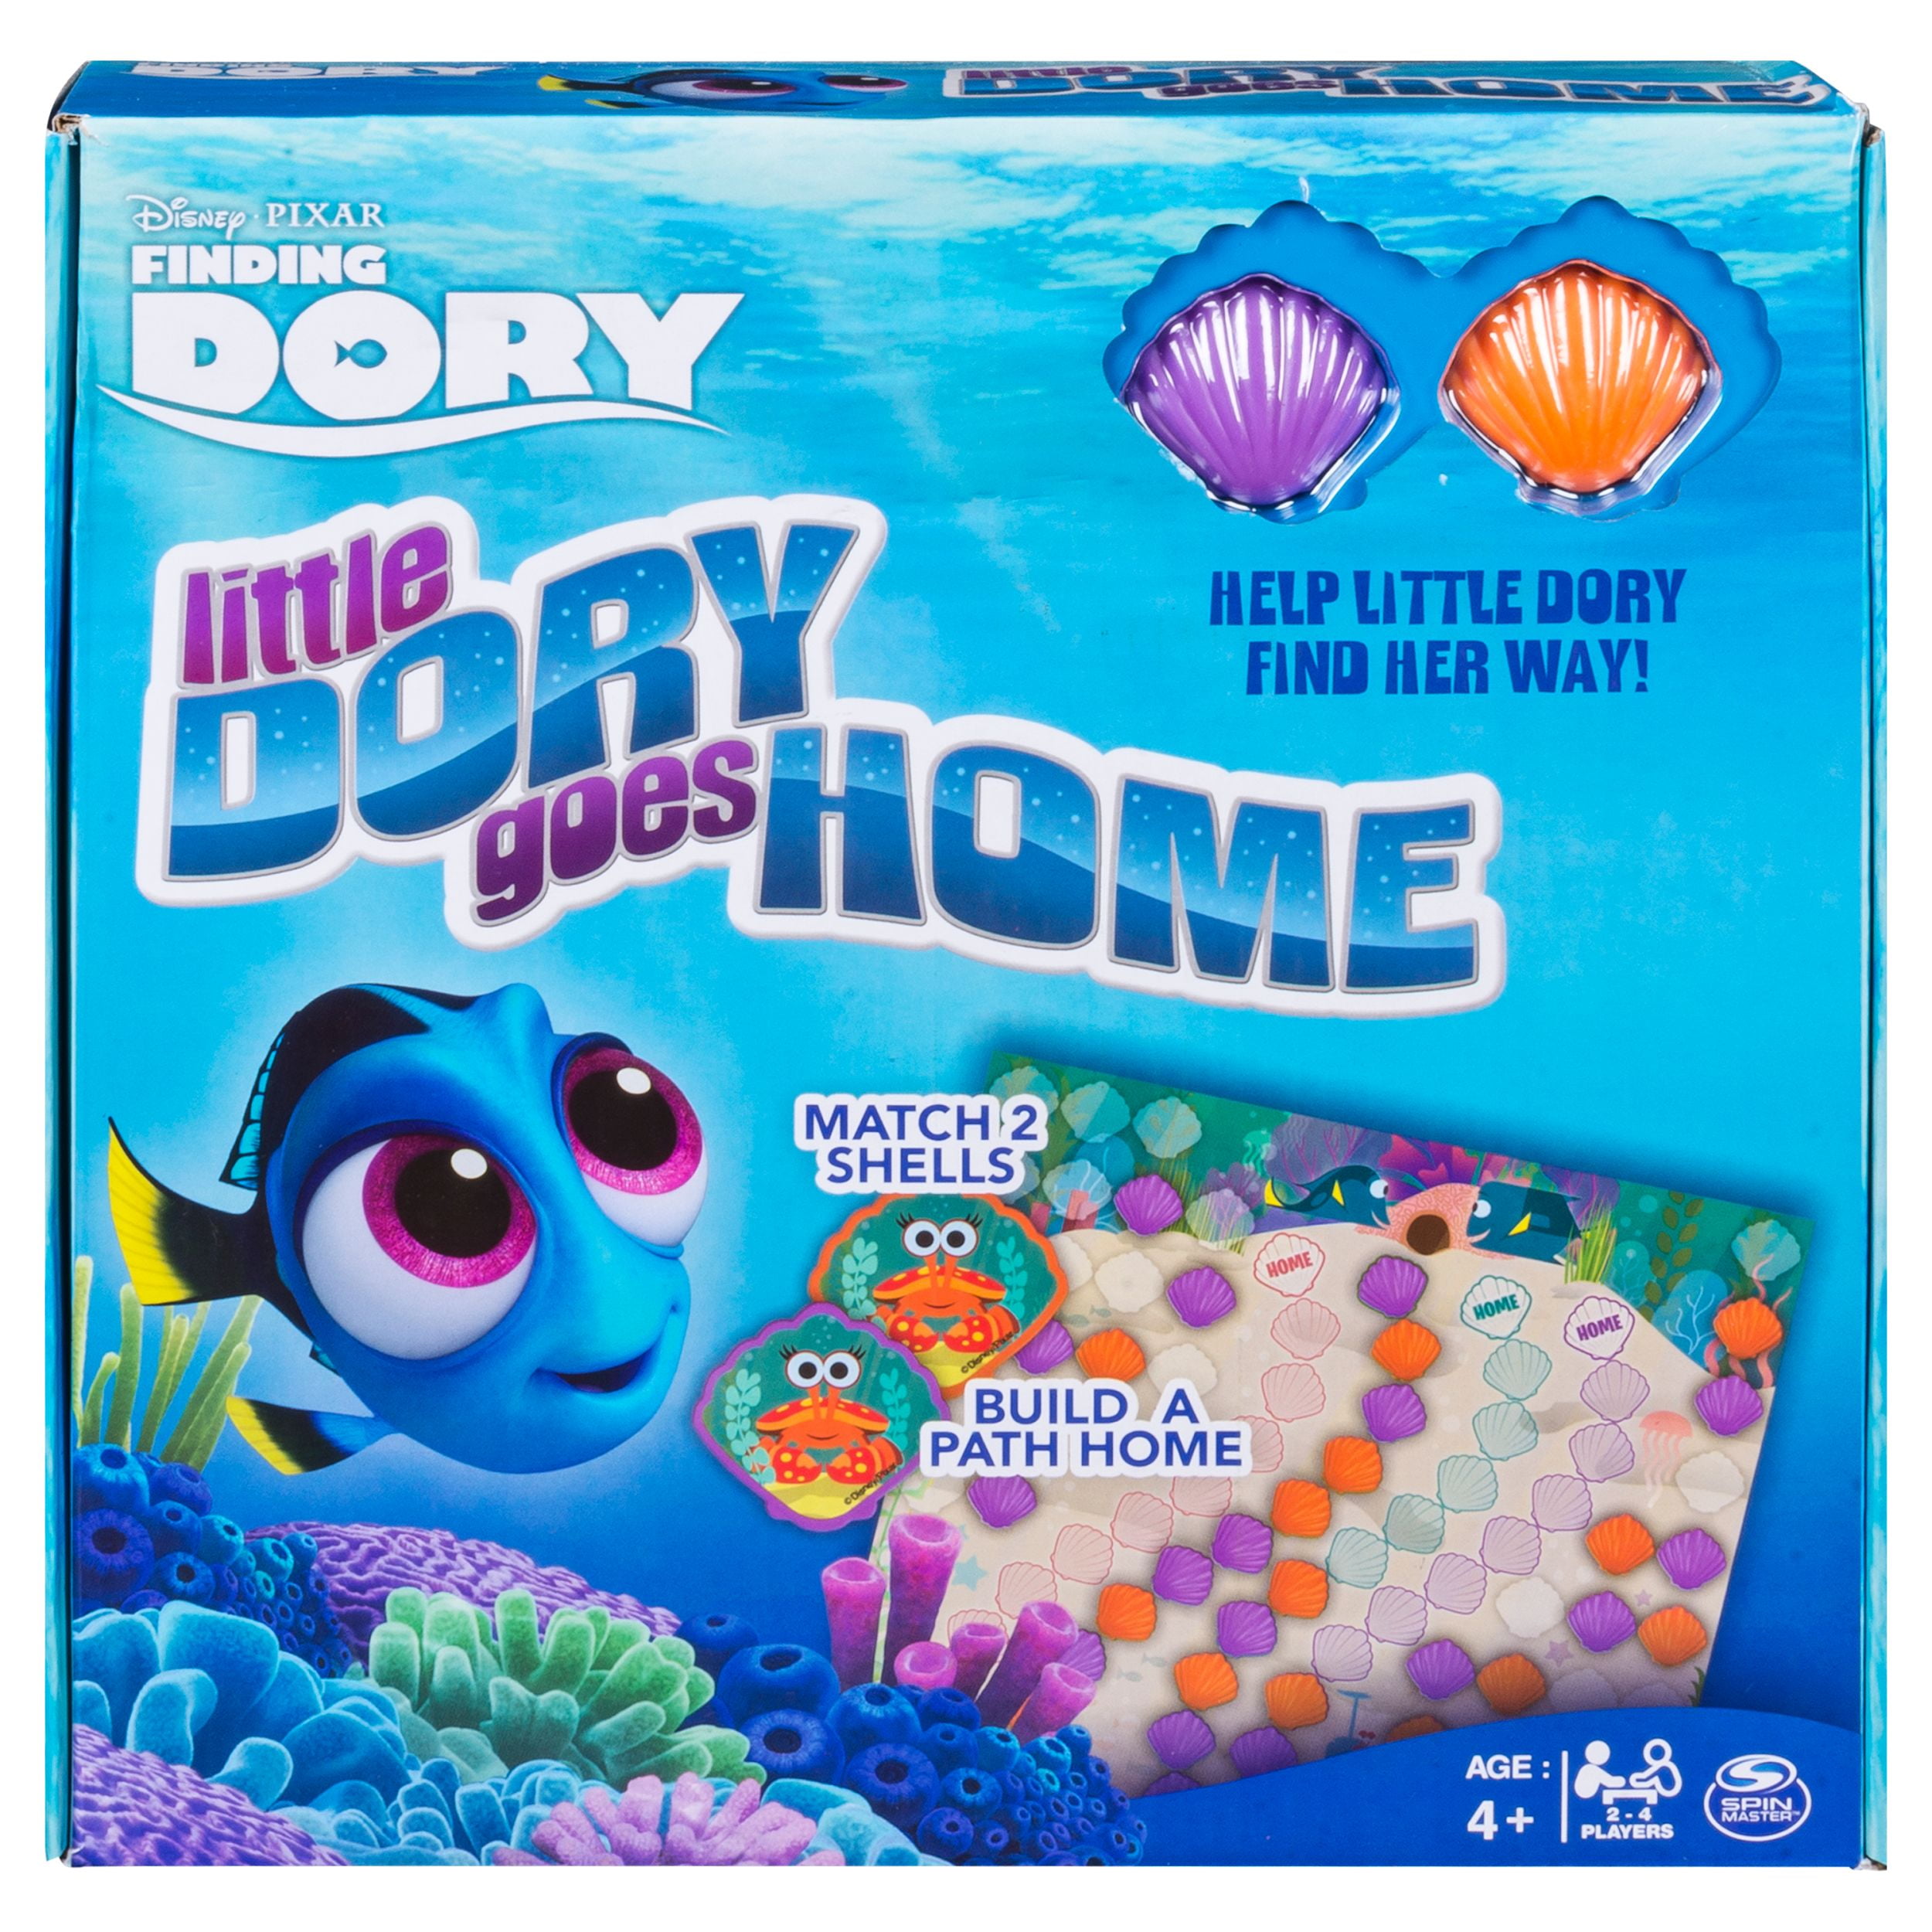 FINDING DORY SHELL COLLECTING GAME DISNEY PIXAR AGES 4 NEW! 